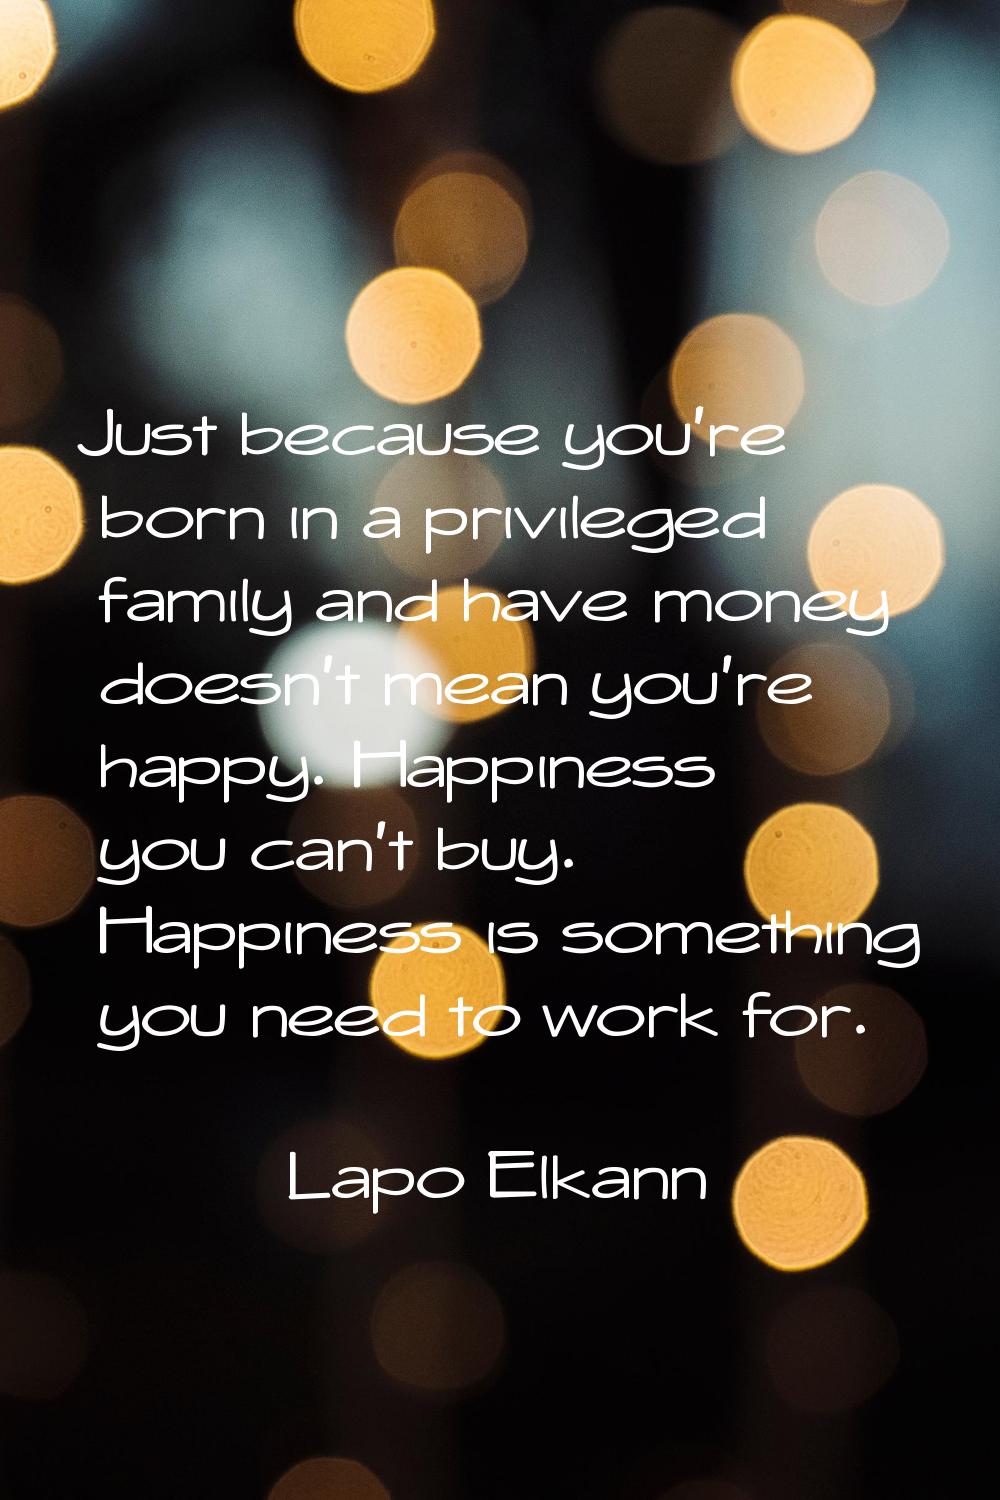 Just because you're born in a privileged family and have money doesn't mean you're happy. Happiness